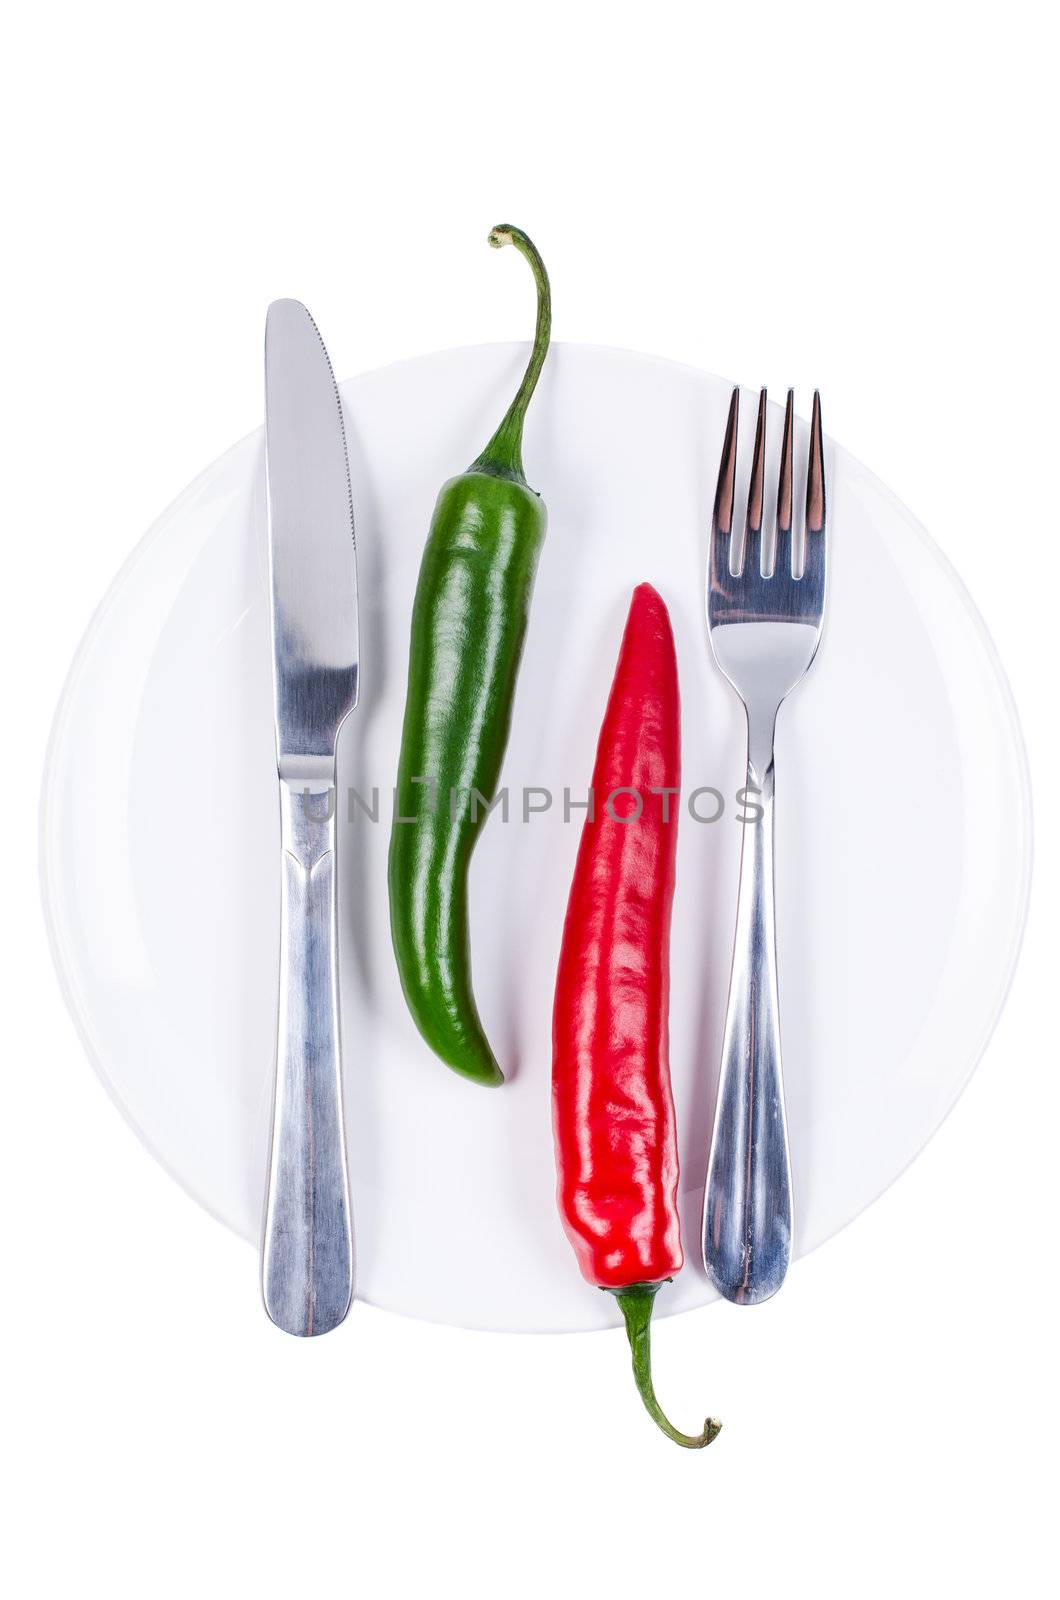 Red and green chili peppers on plate by Nanisimova